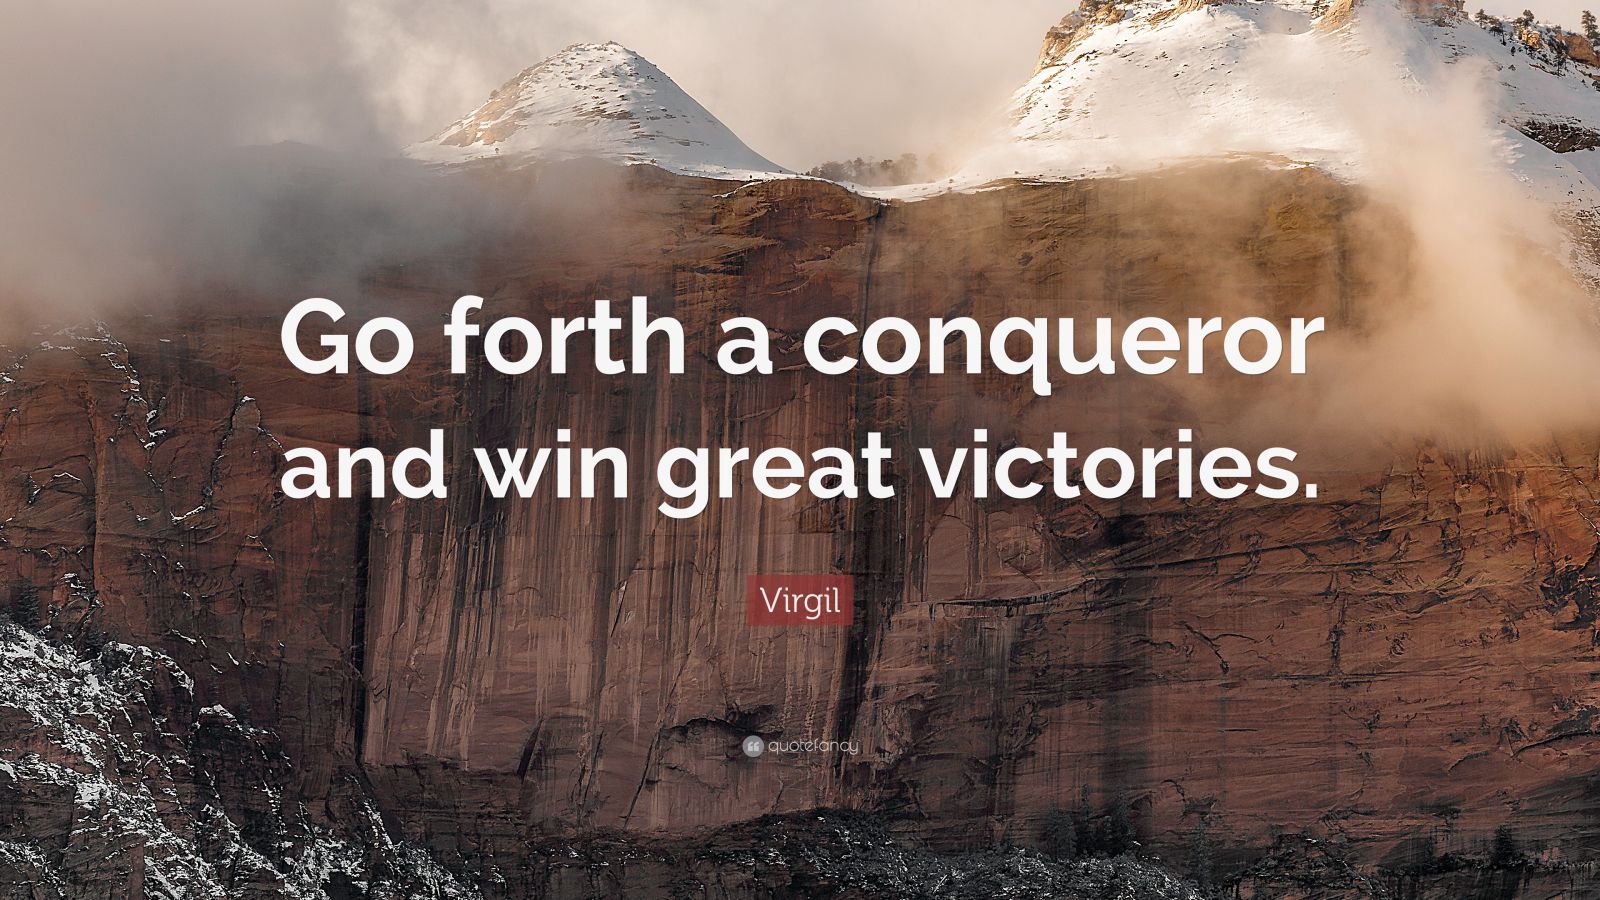 go forth and conquer